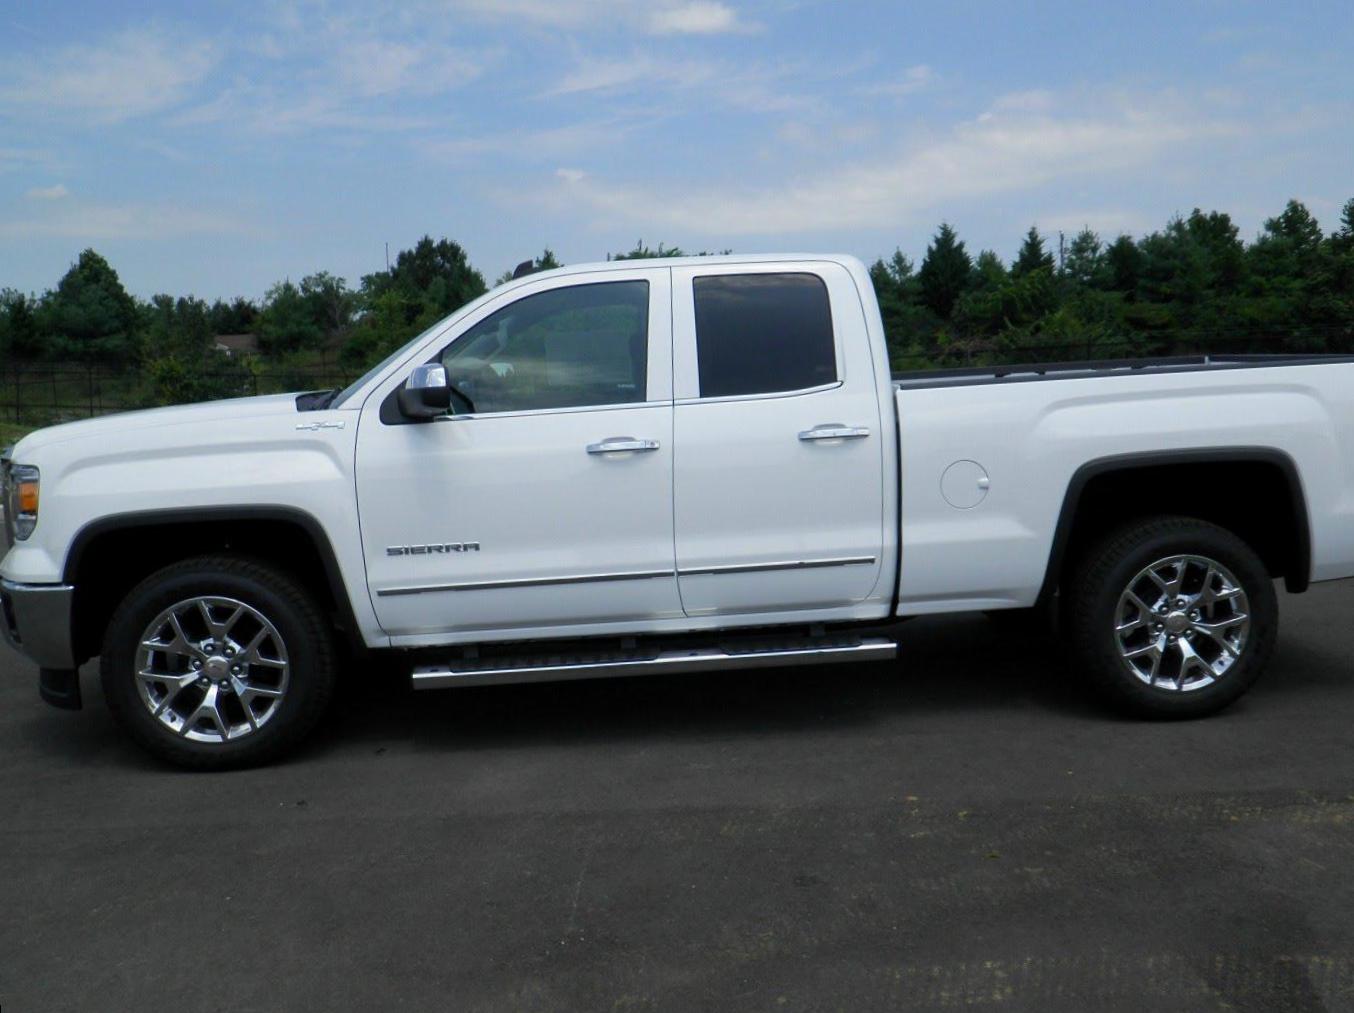 Sierra Double Cab GMC approved hatchback